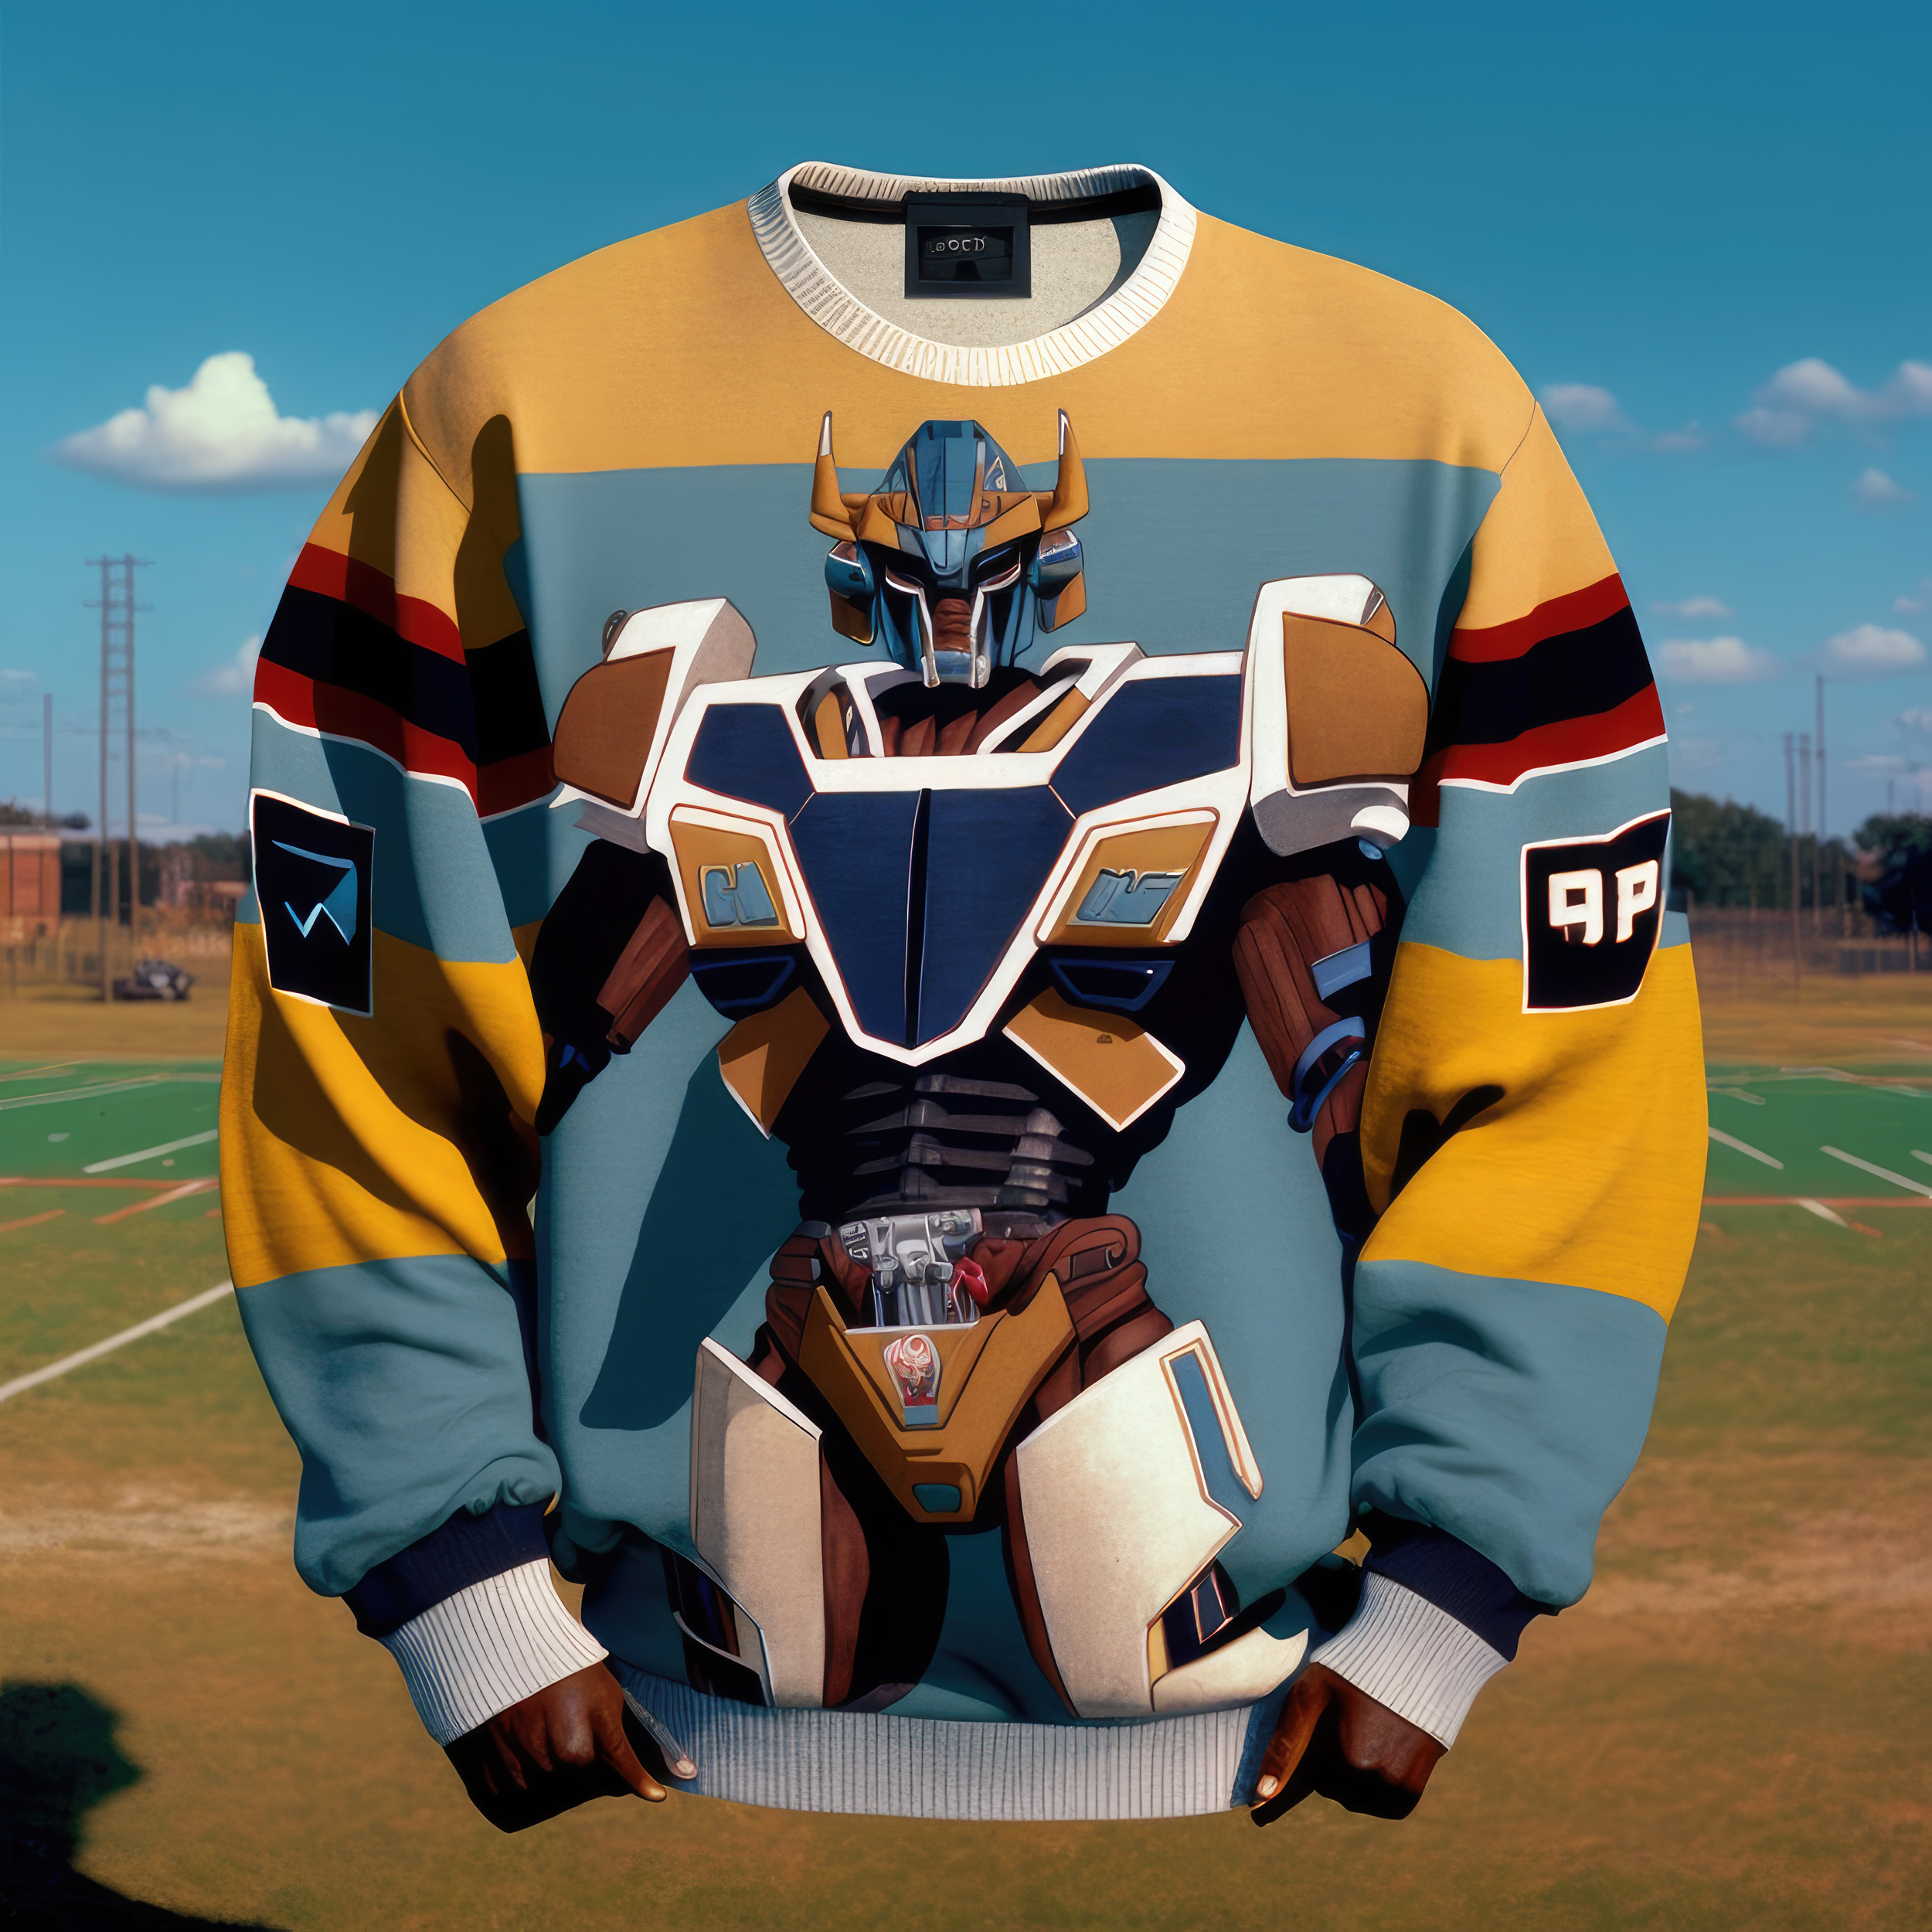 tonycncp_transformer_wearing_vintage_polo_stadium_1992_sweater__bce4144f-65fe-4188-8fe5-710d551b4901-gigapixel-standard-scale-4_00x.png